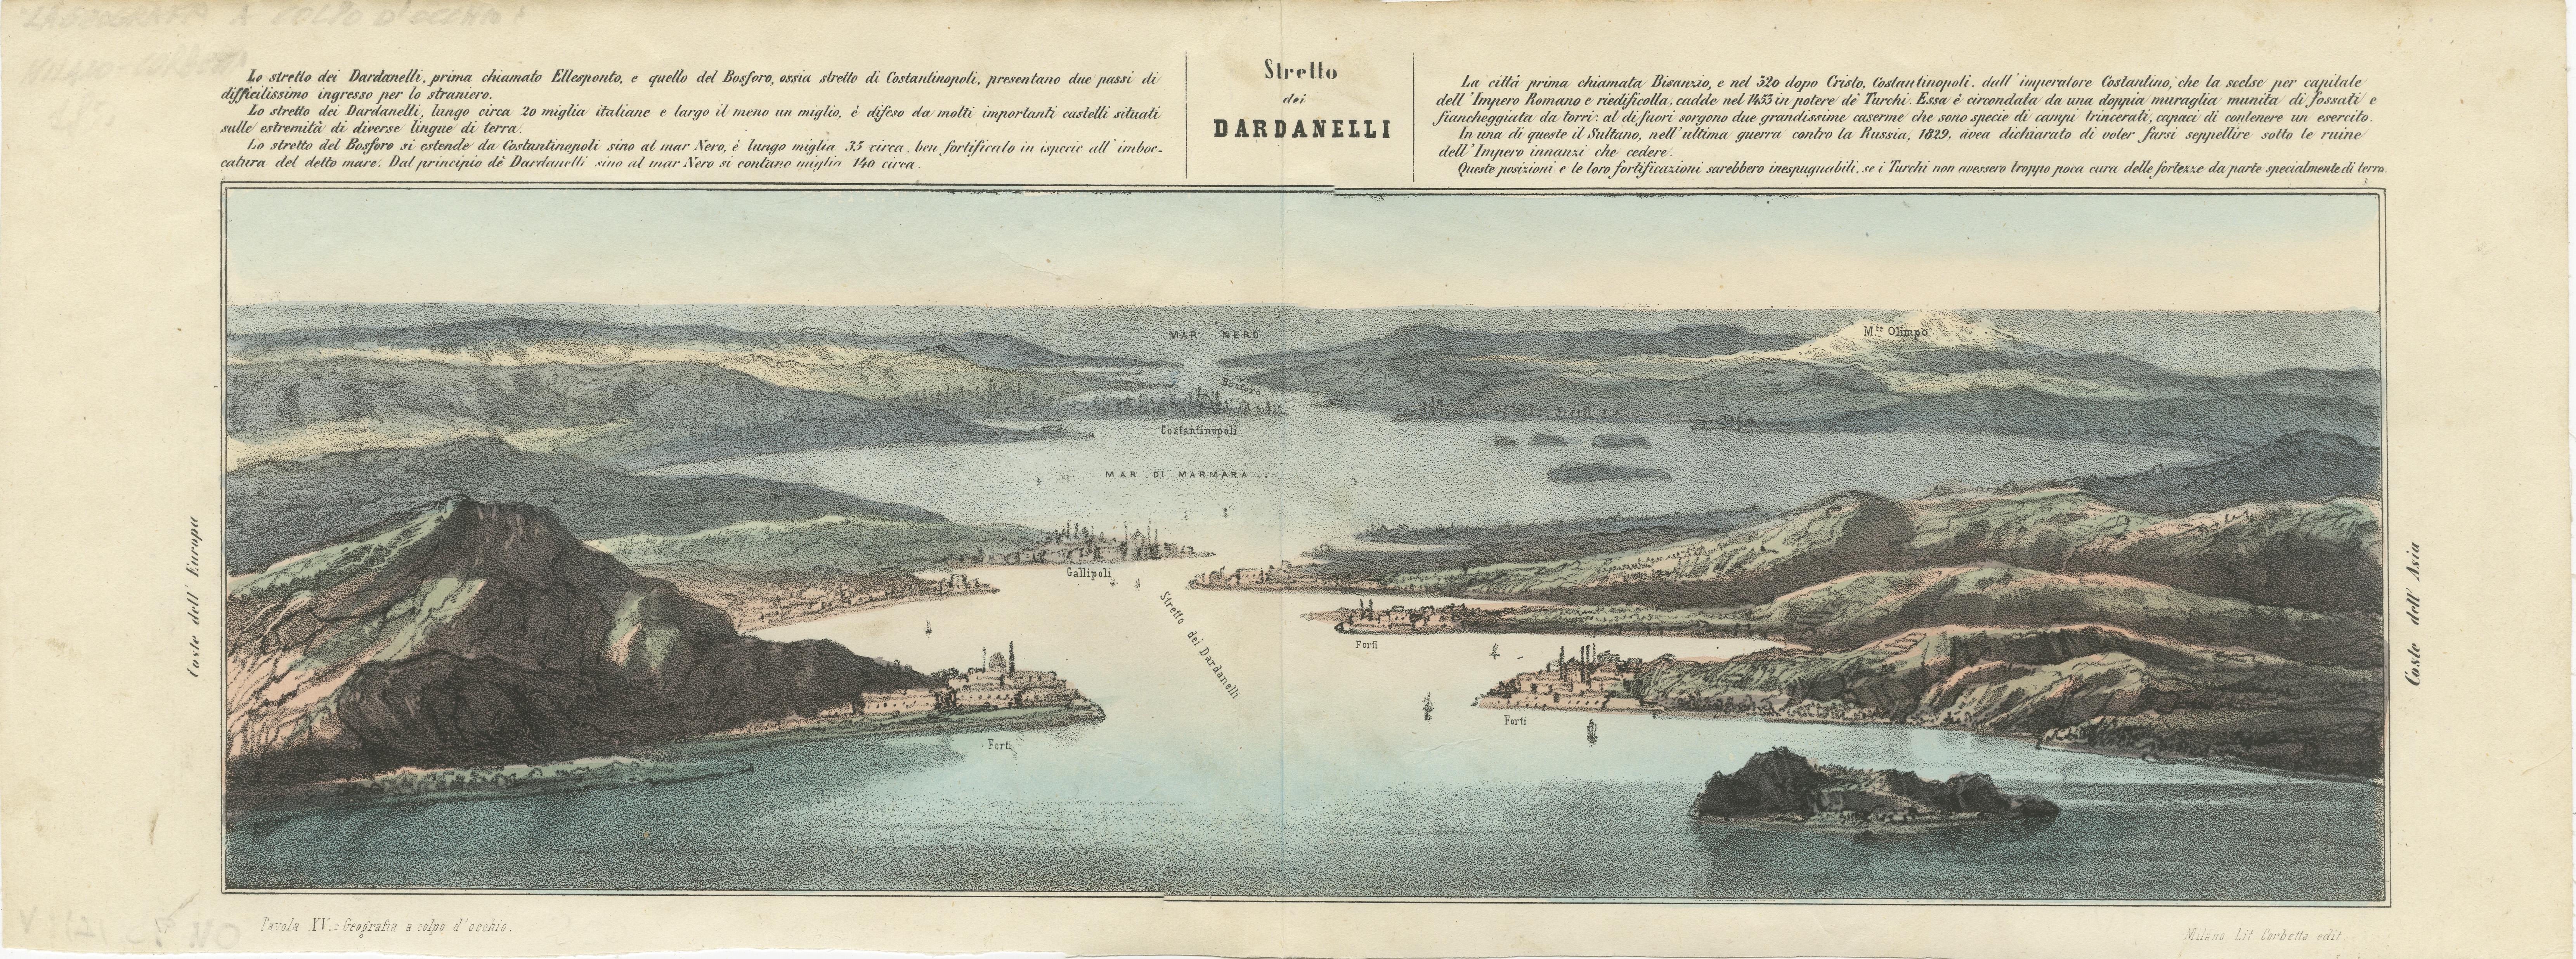 The text on this colored lithograph is Italian, and it relates to the geography of the Dardanelles  straits.

